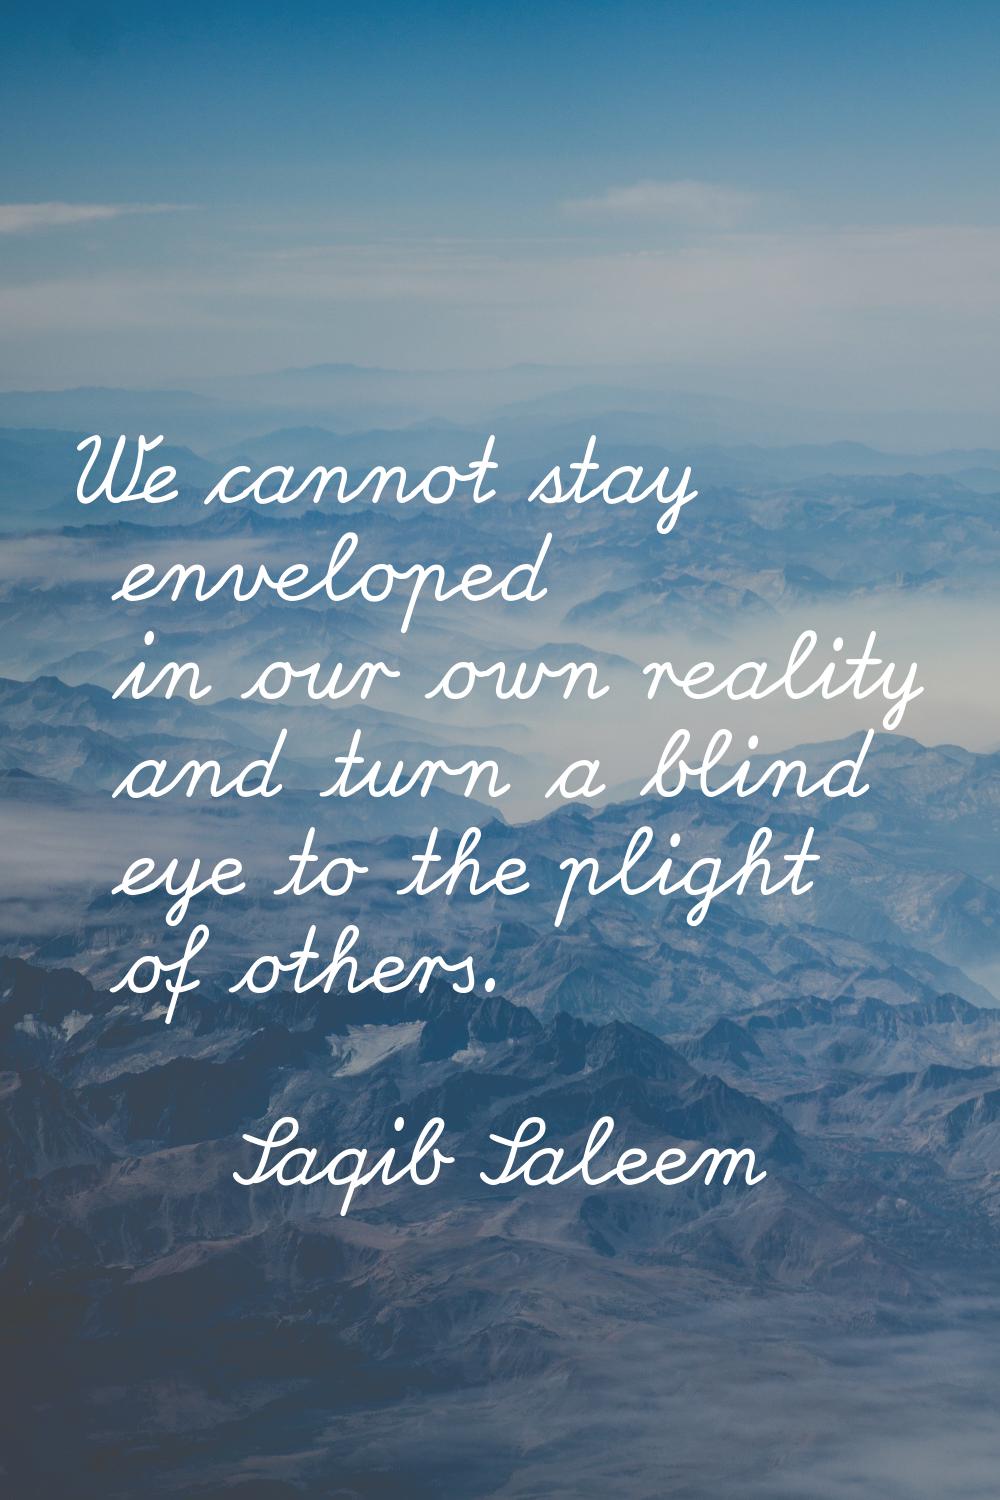 We cannot stay enveloped in our own reality and turn a blind eye to the plight of others.